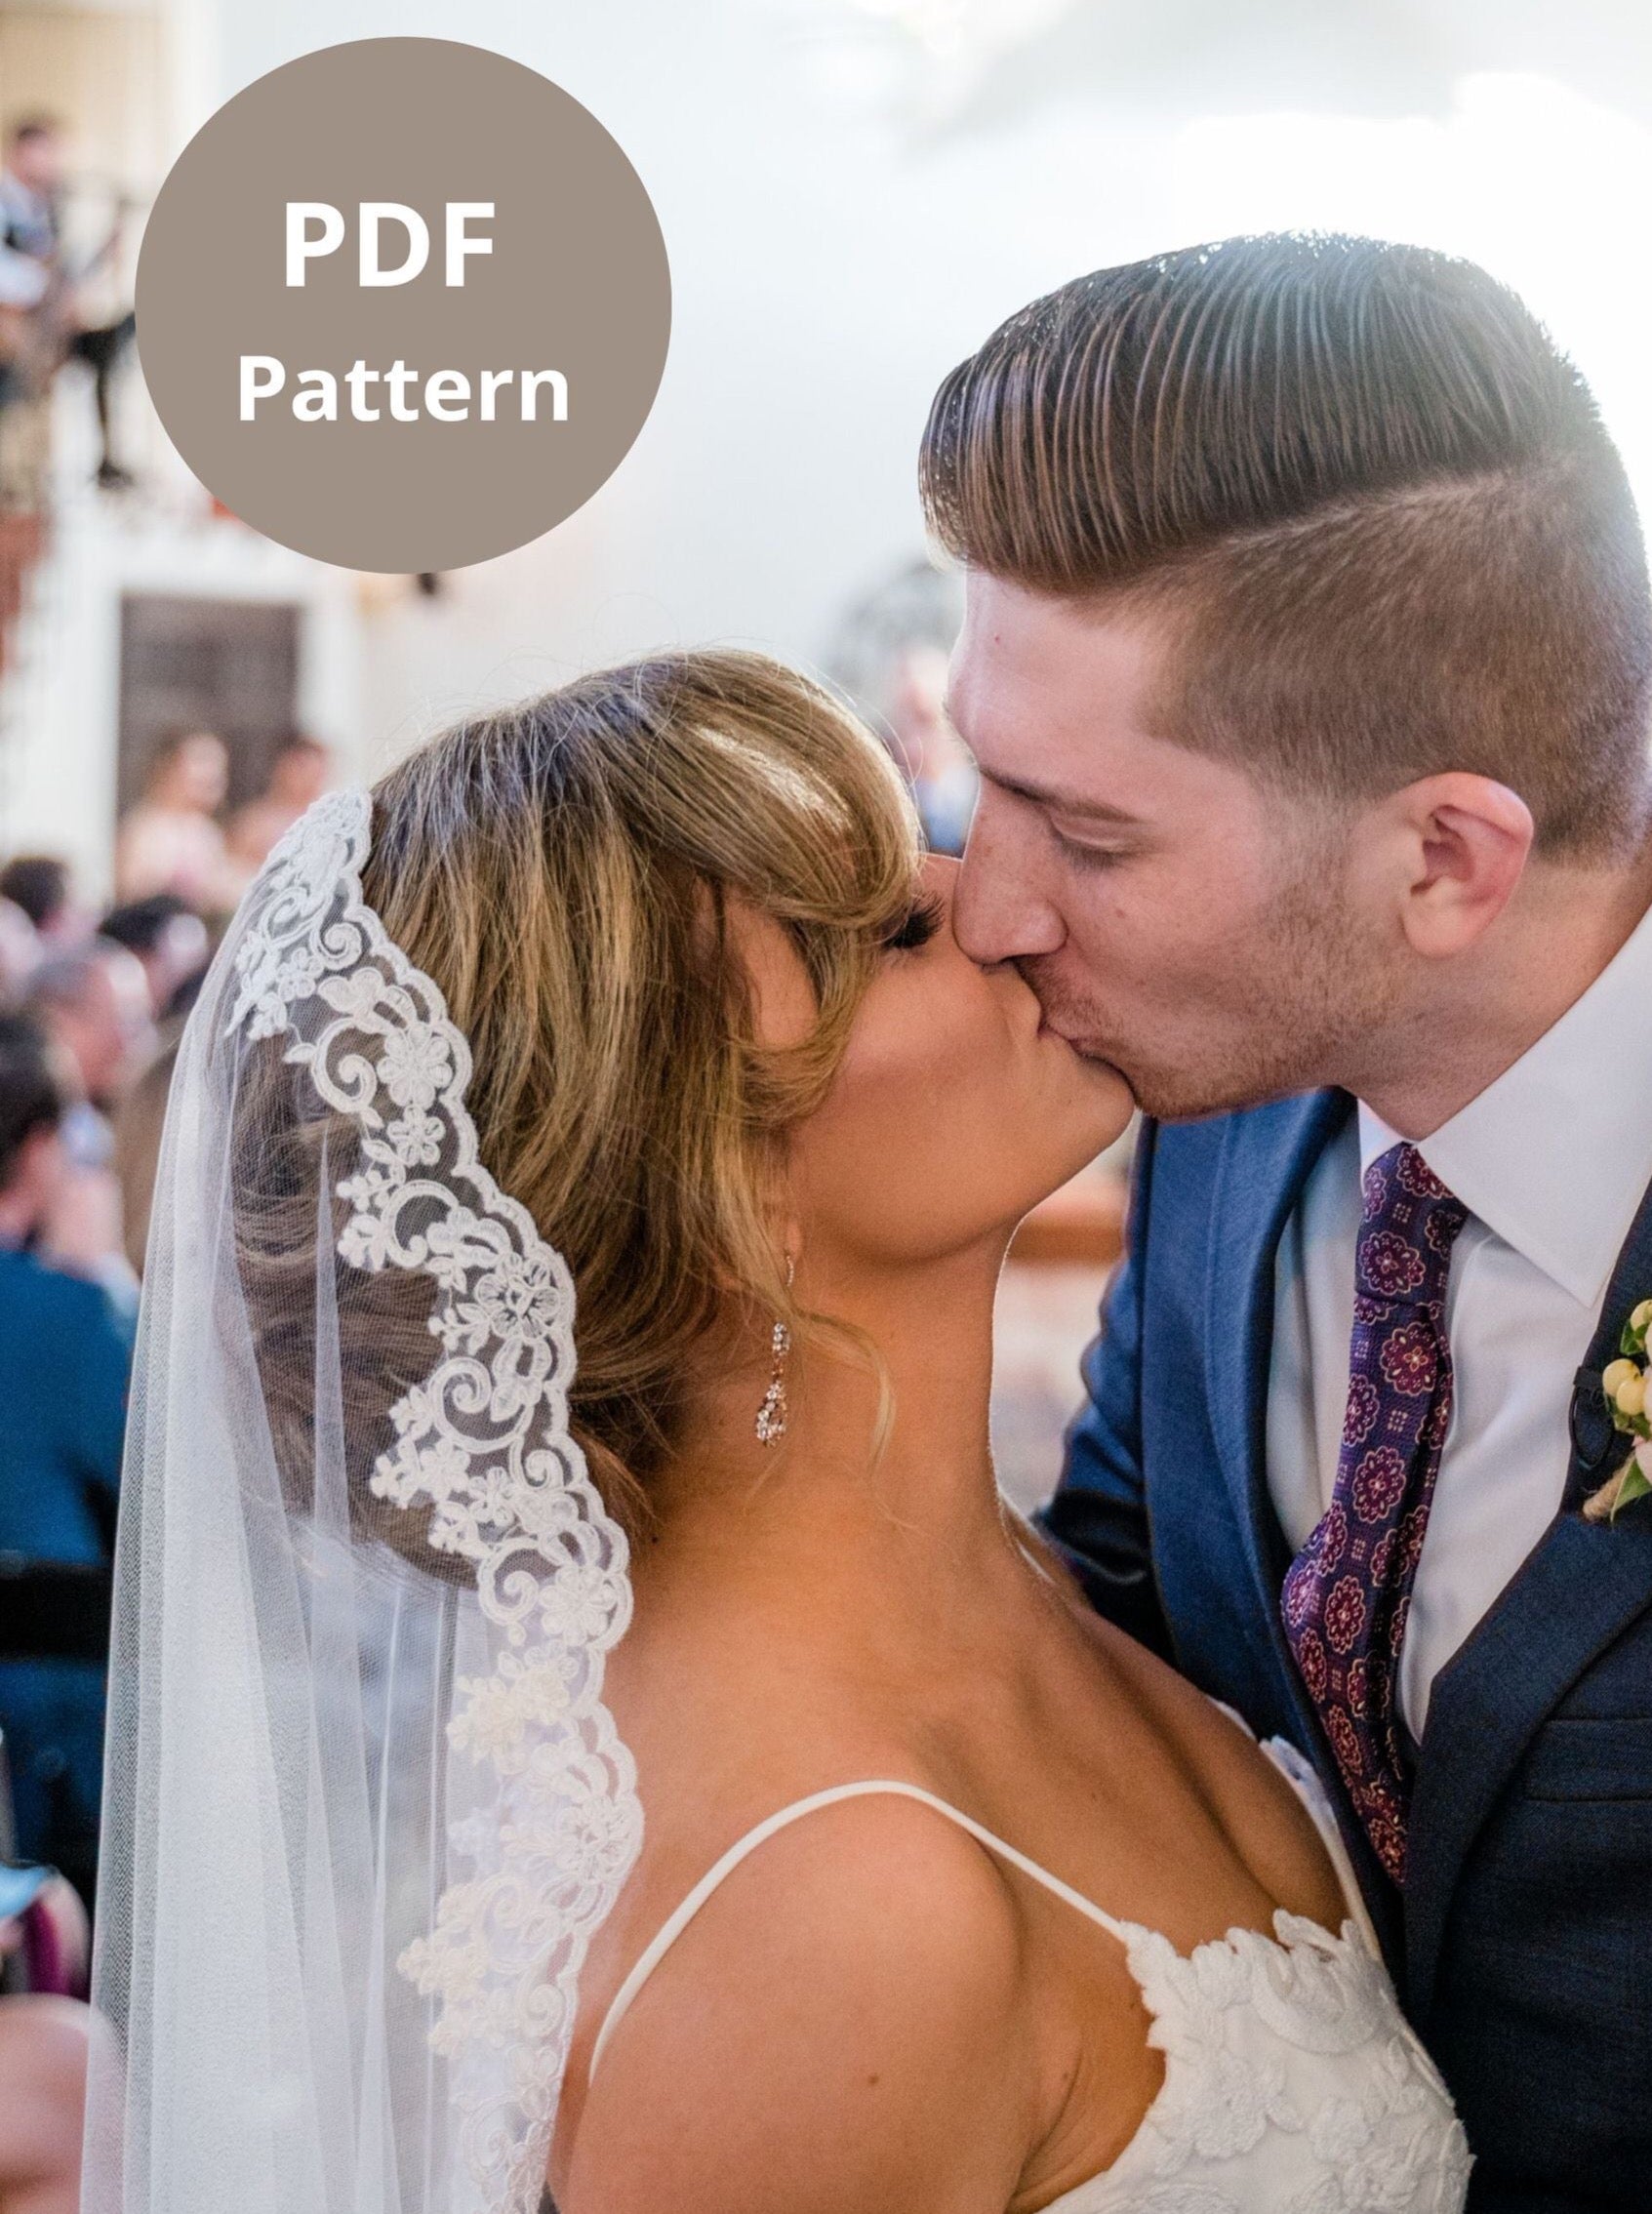 sheer one layer mantilla wedding veil on bride wearing updo with instructions on how to make the accessory